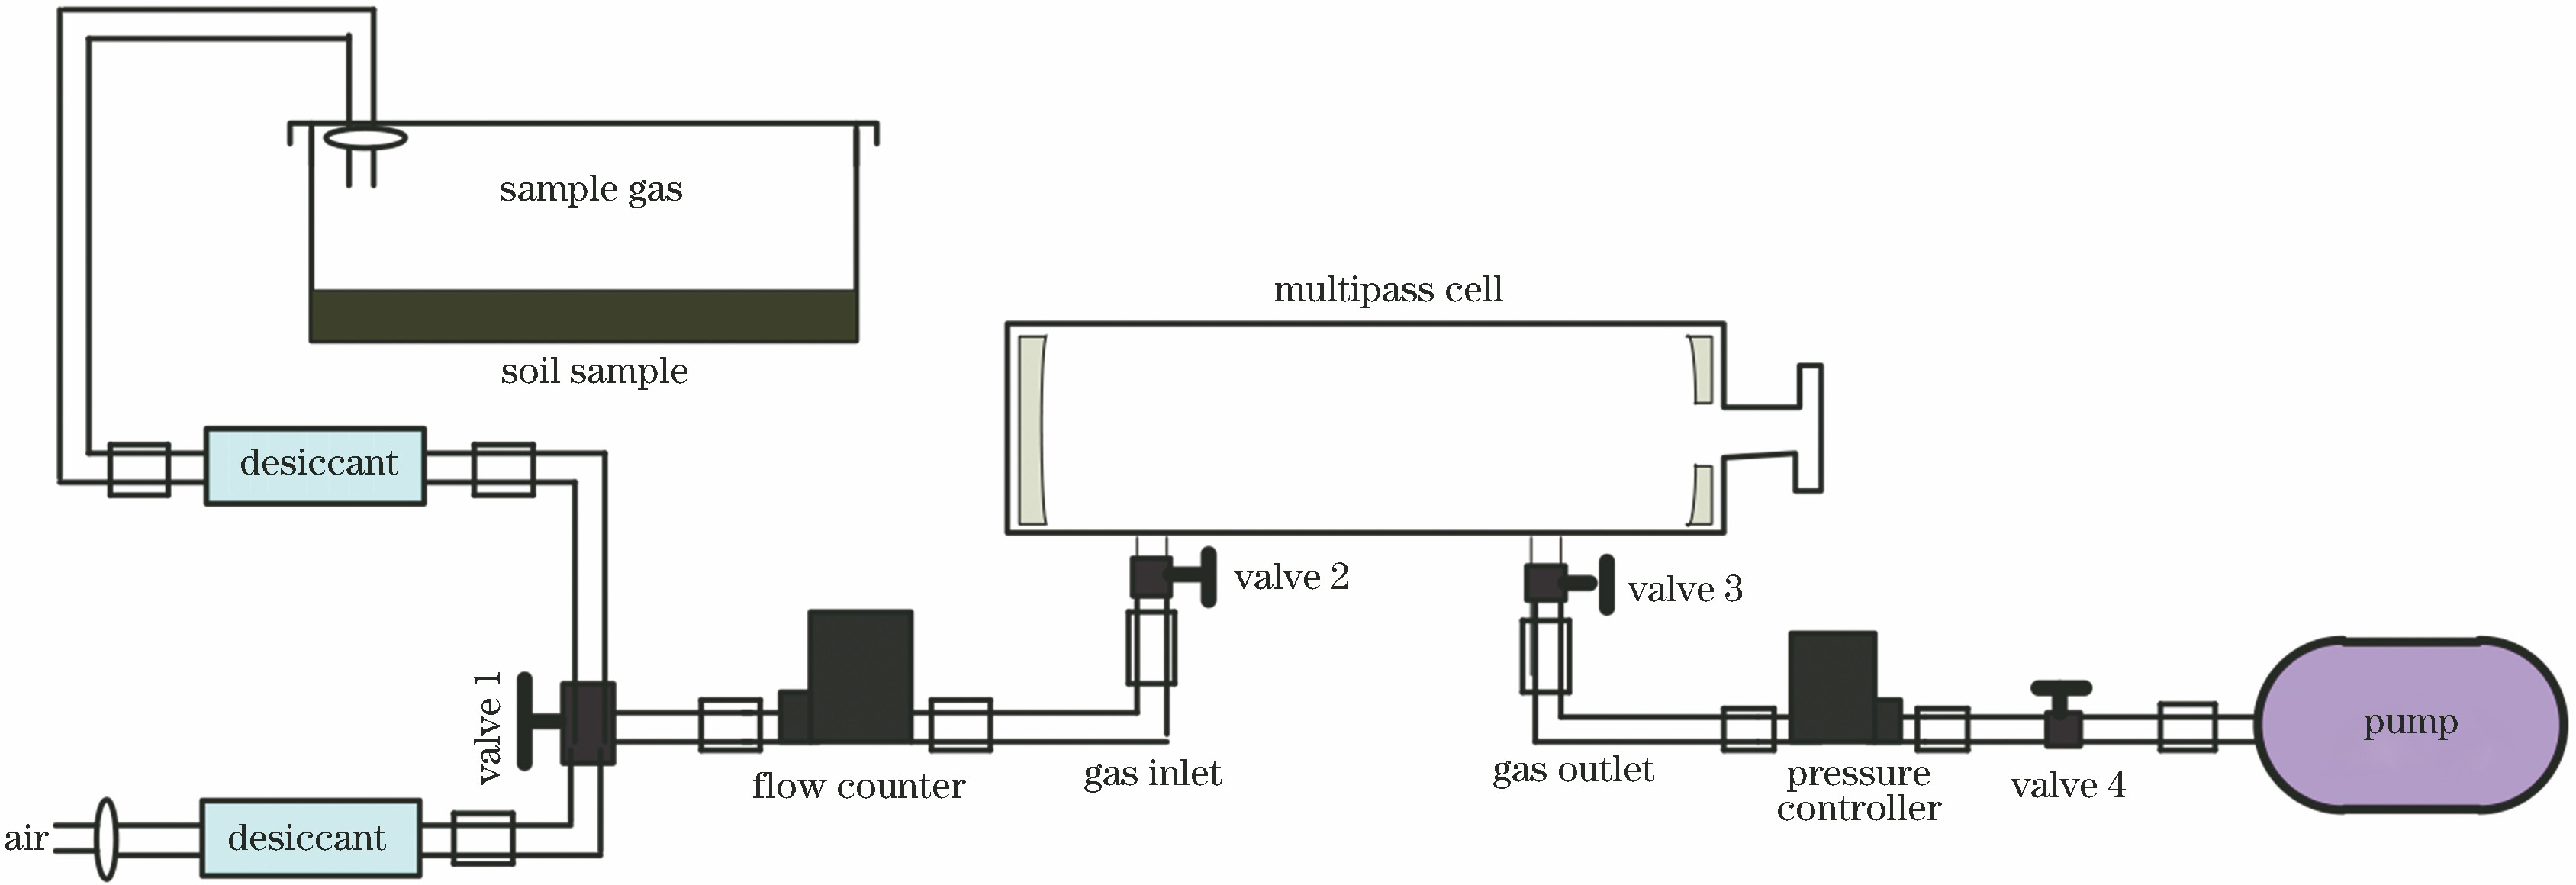 Schematic of gas sampling system